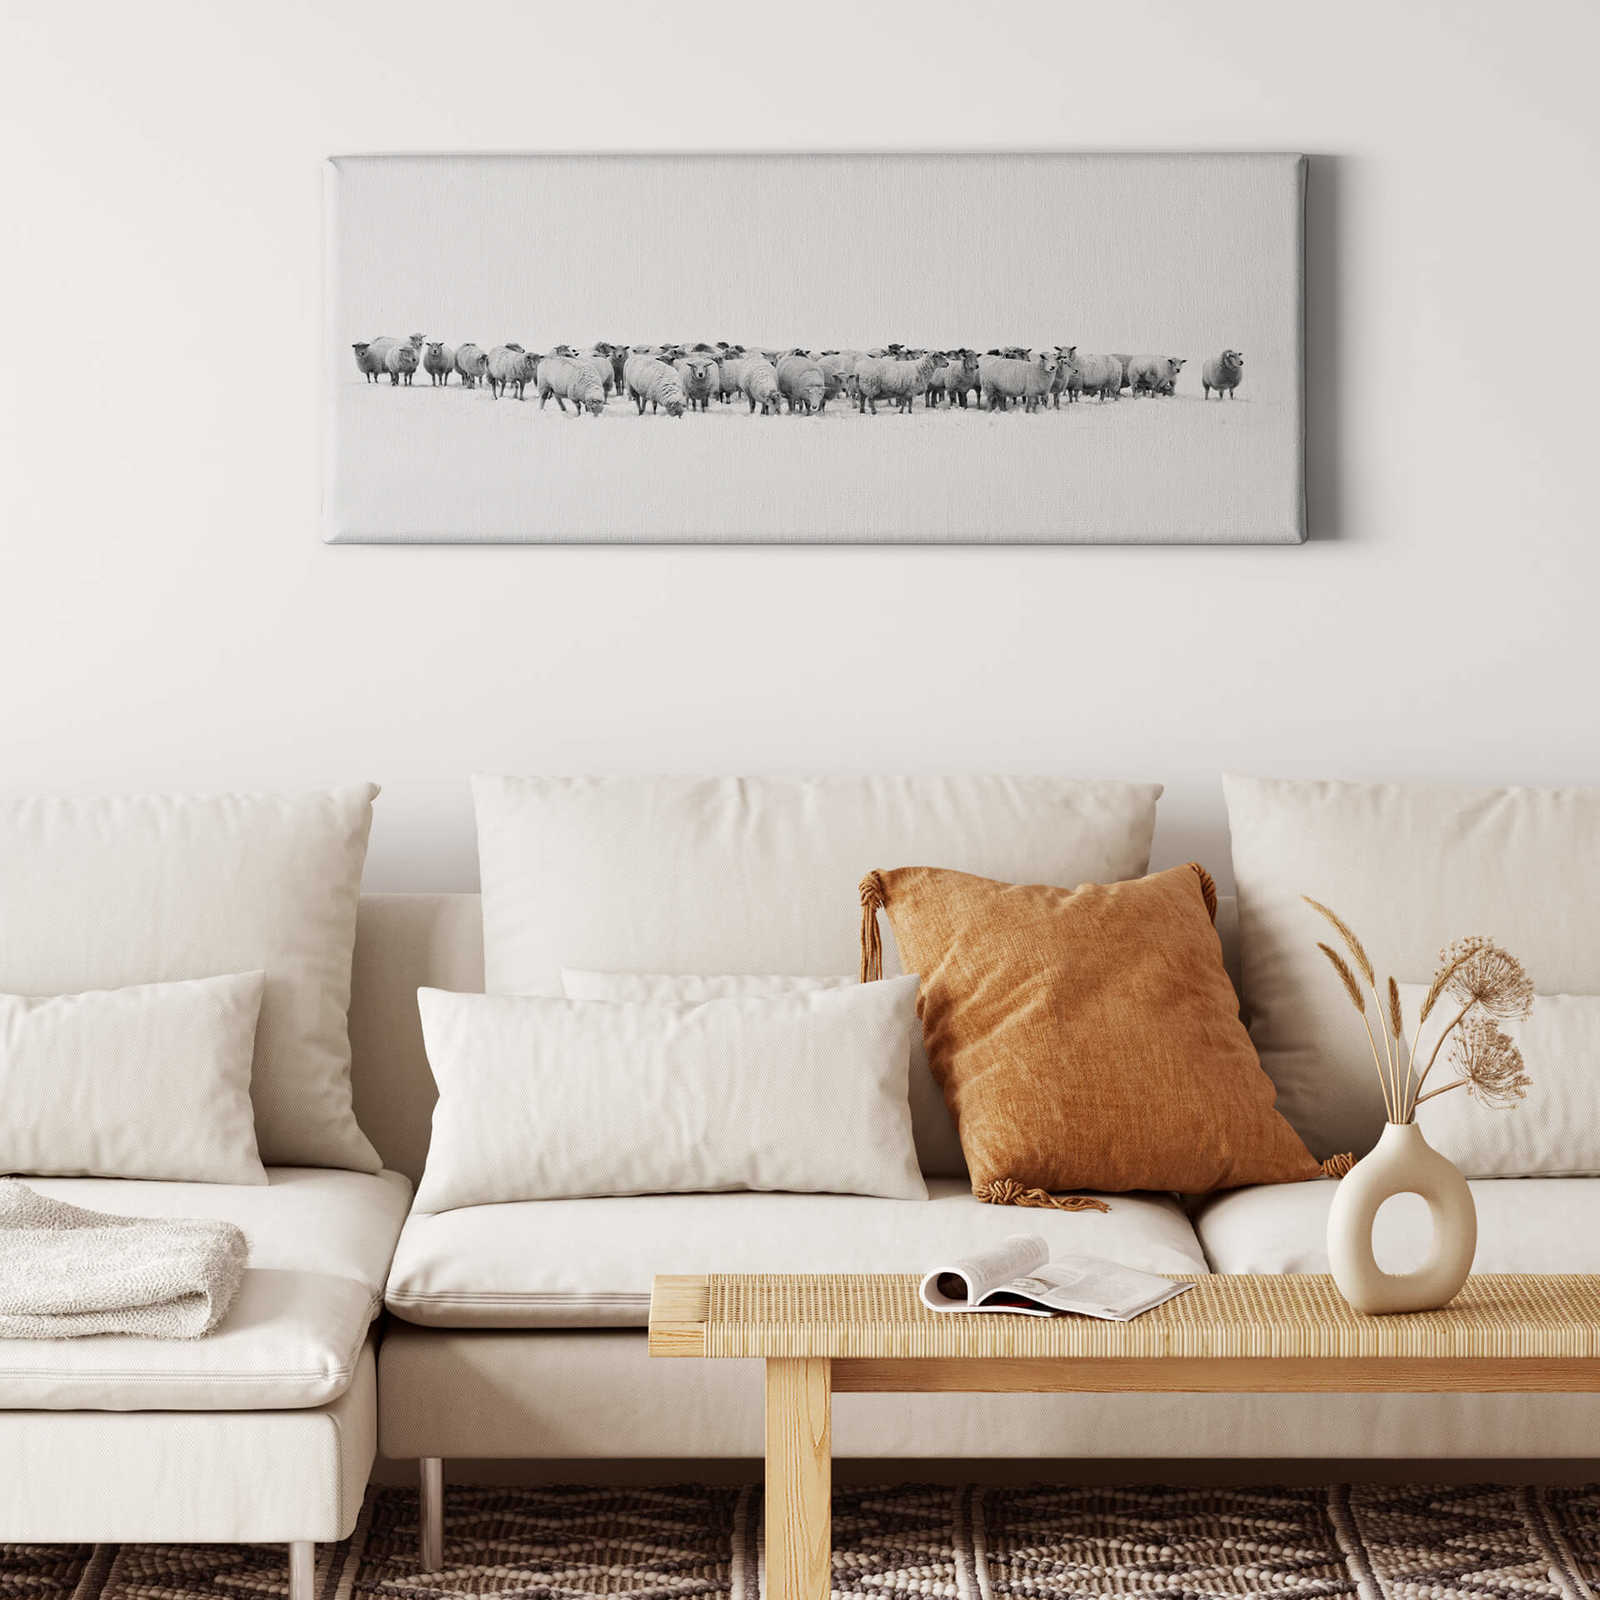             Panorama Canvas print flock of sheep – black and white
        